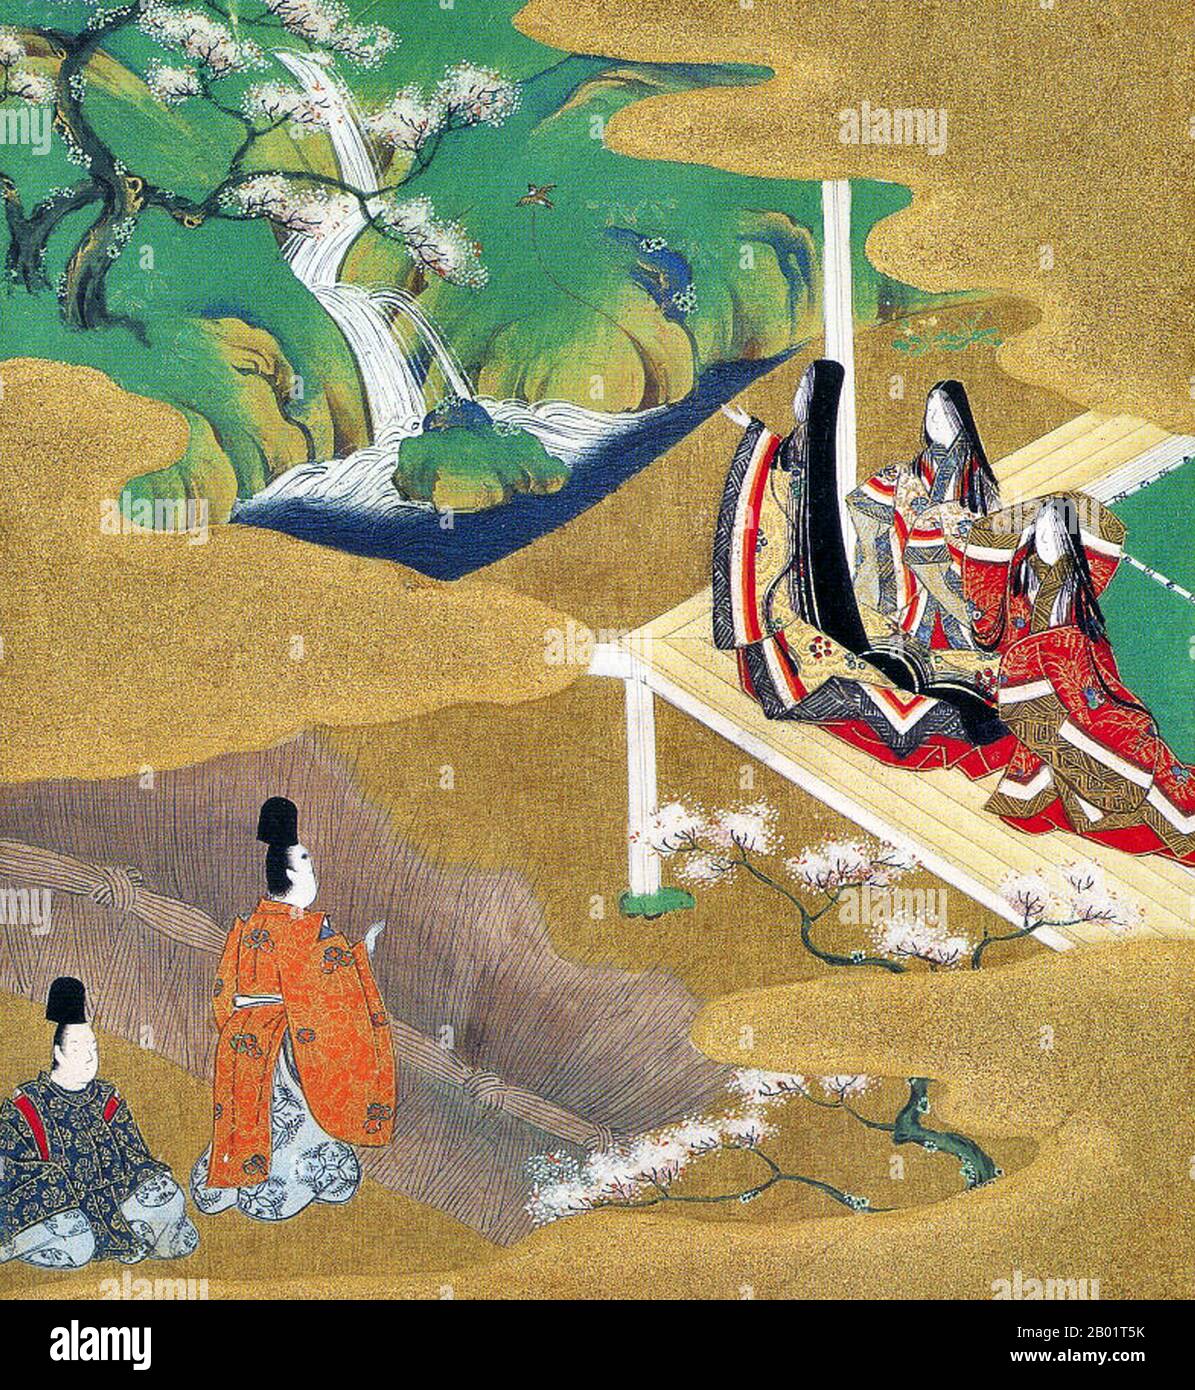 Japan: 'Chapter 5 - Wakamurasaki' from the 'Tale of Genji'. Painting by Tosa Mitsuoki (23 October 1617 - 25 September 1691), late 17th century.  The Tale of Genji (Genji Monogatari) is a classic work of Japanese literature attributed to the Japanese noblewoman Murasaki Shikibu in the early 11th century, around the peak of the Heian period.  It is sometimes called the world's first novel, the first modern novel, the first psychological novel or the first novel still to be considered a classic. Notably, the novel also illustrates a unique depiction of the livelihoods of Heian Era high courtiers. Stock Photo